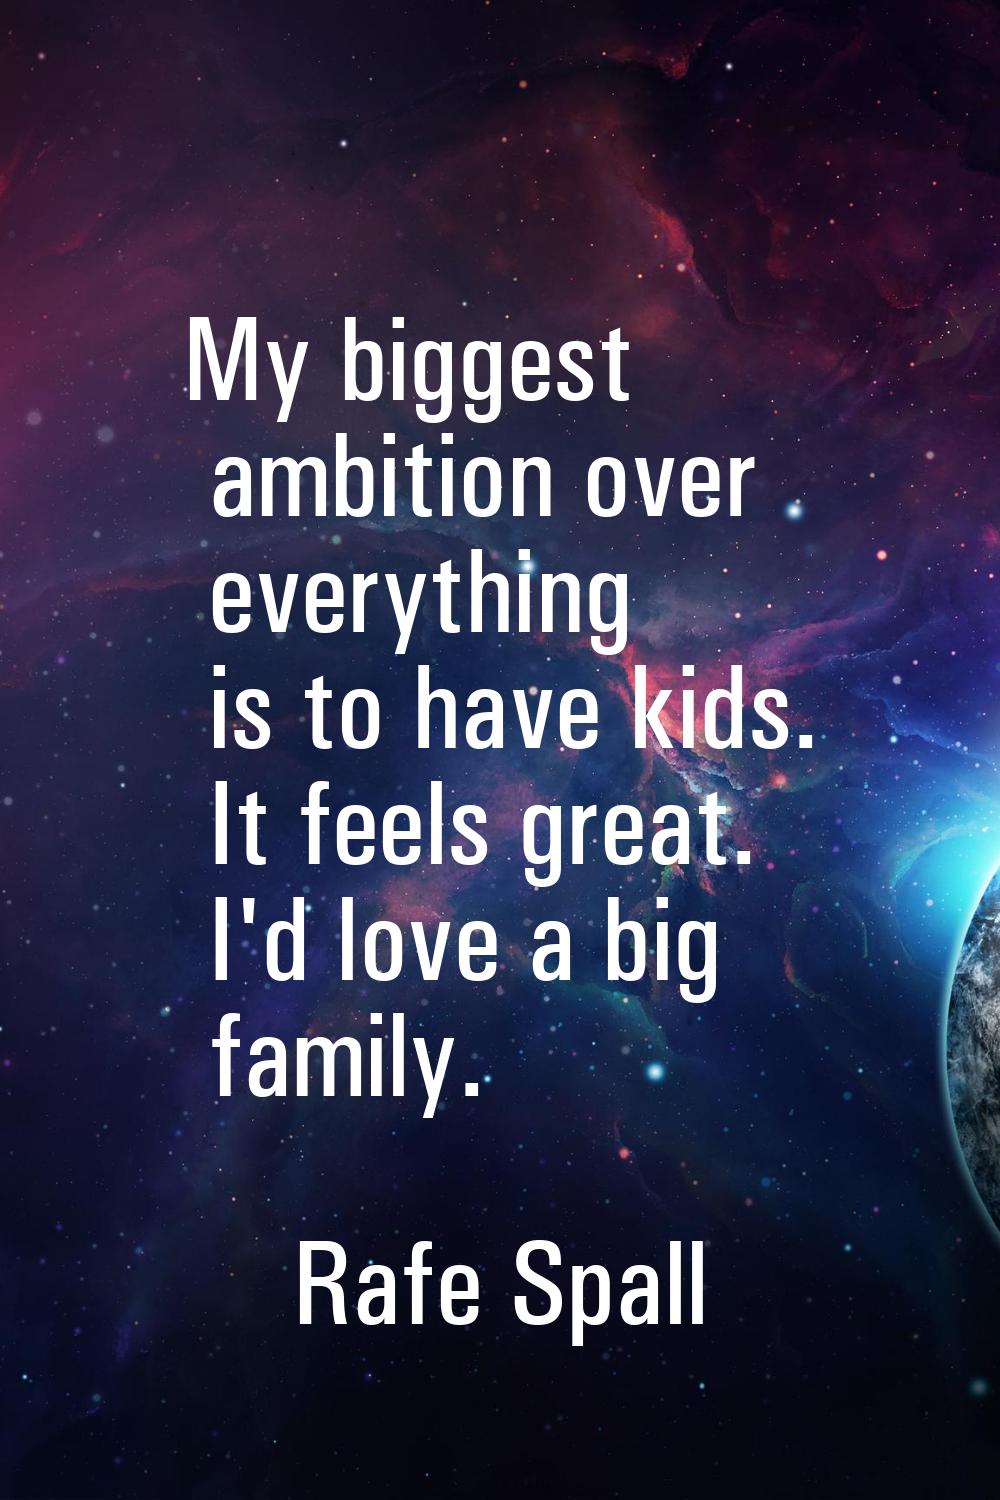 My biggest ambition over everything is to have kids. It feels great. I'd love a big family.